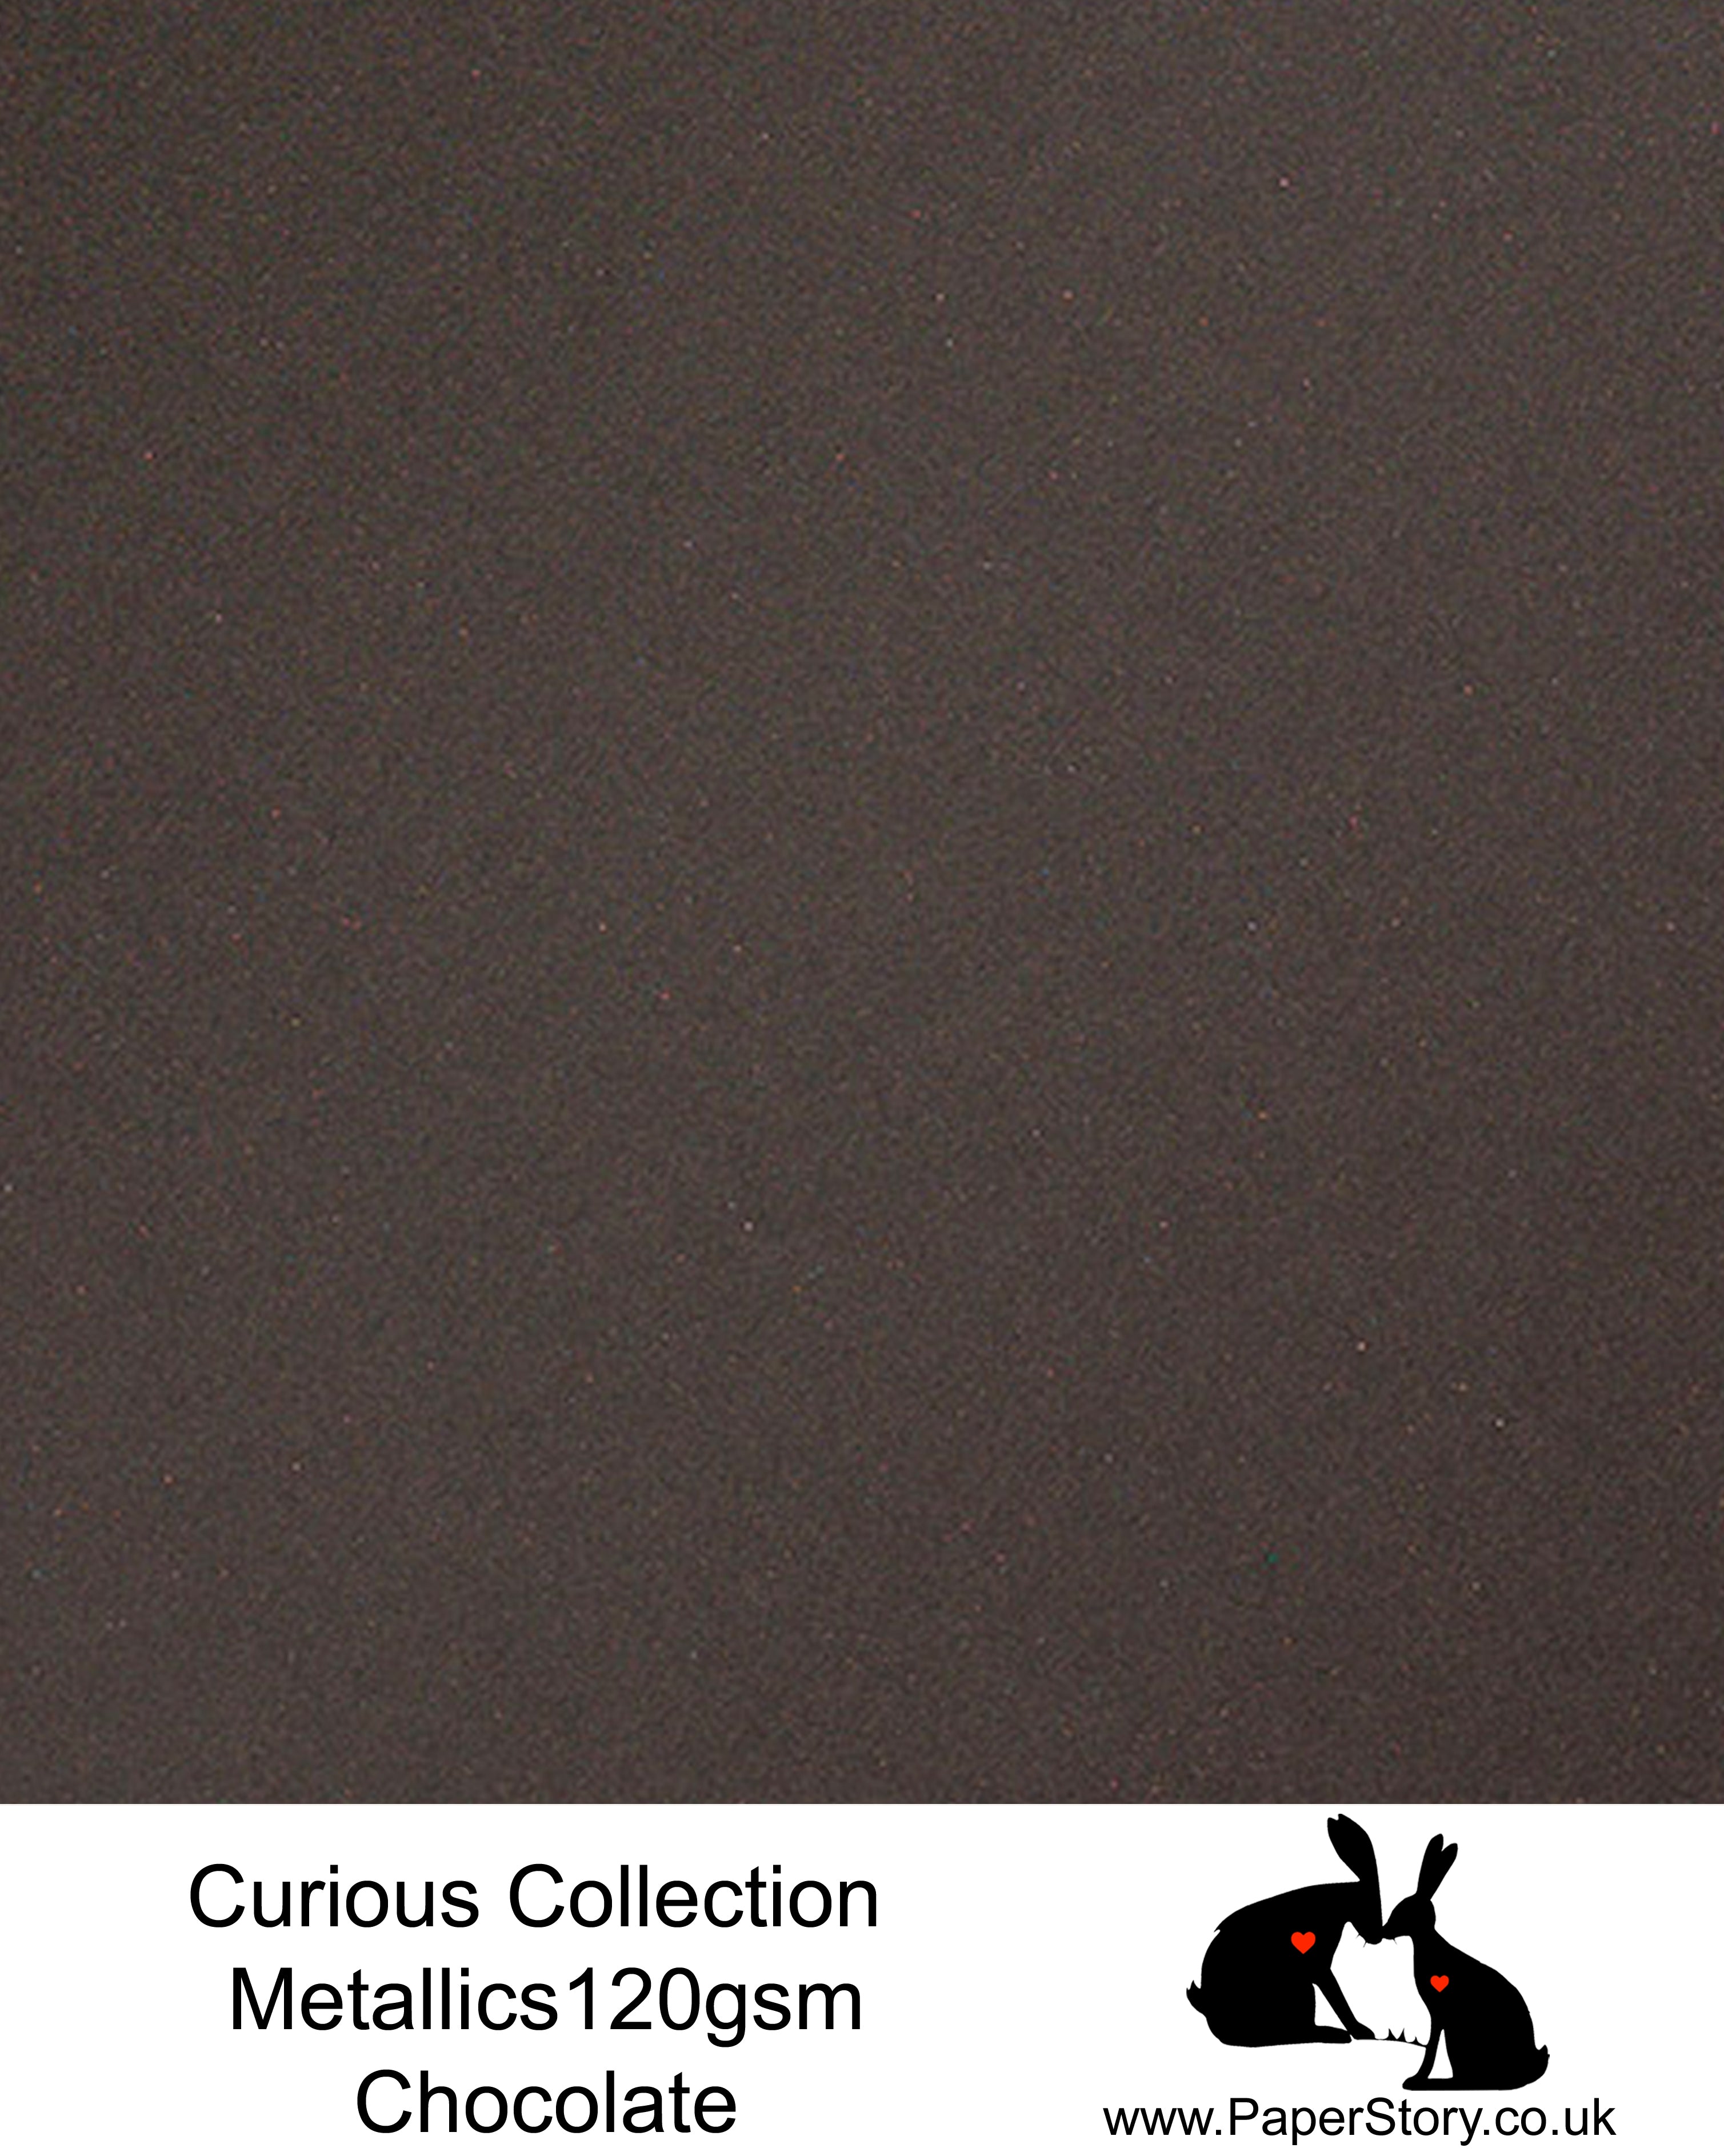 Curious Collection Curious Metallics Chocolate black slate, is a deep dark brown almost black. This unique metallic paper is unlike any other metallic shimmer surface, the natural underlying wove surface of Curious Metallics enhances the stunning metallic shimmer